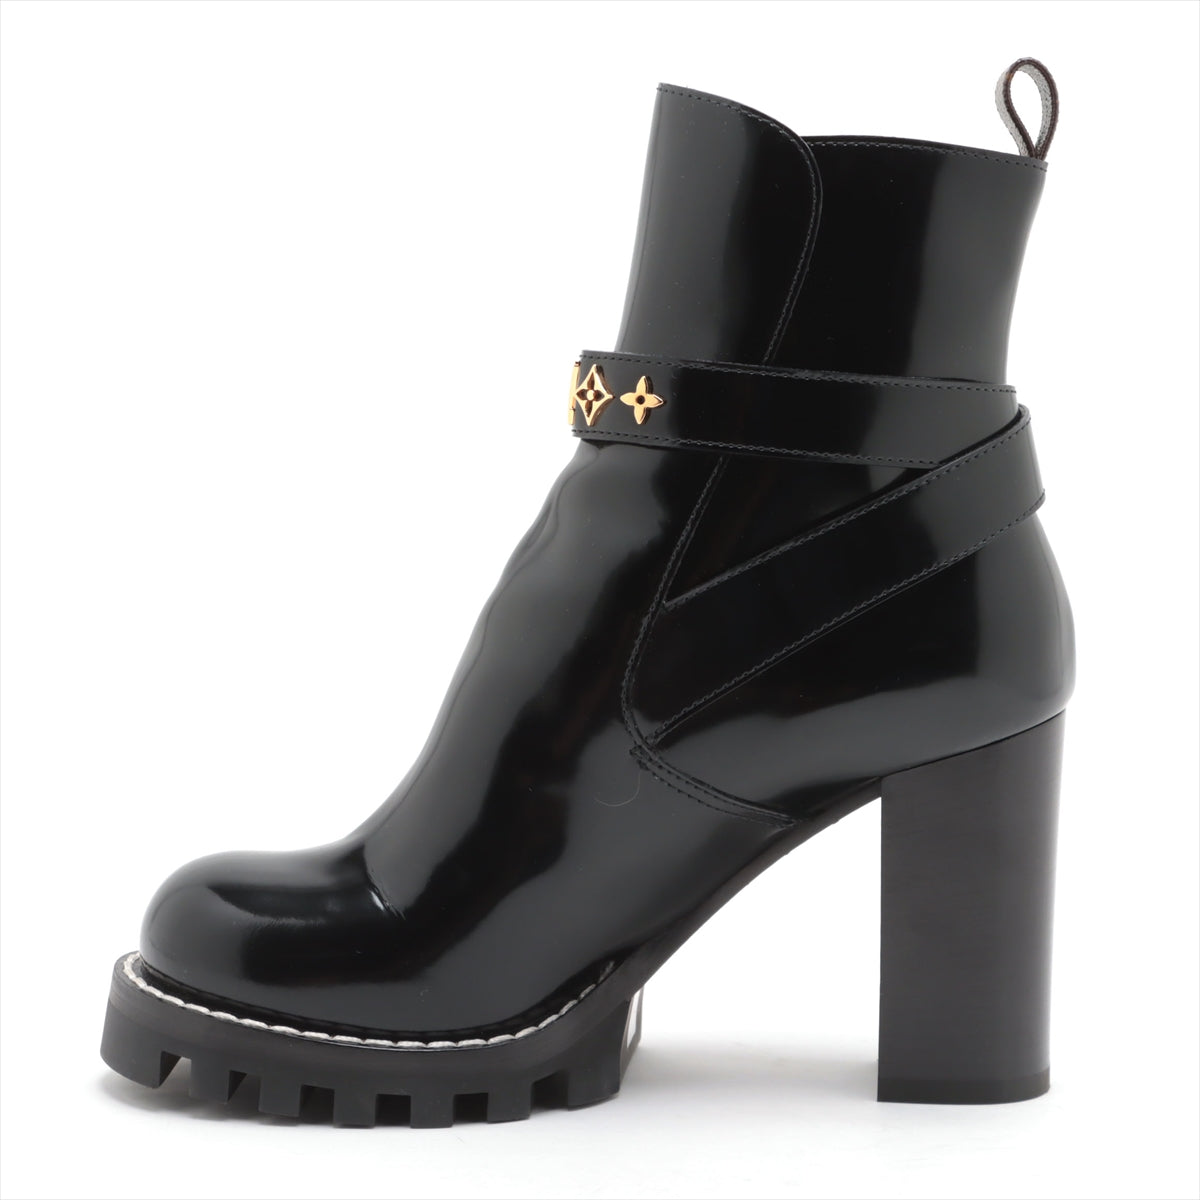 Louis Vuitton Star Trail Line 21 years Patent Leather Short Boots 38.5 Ladies' Black MA0231 monogram studs